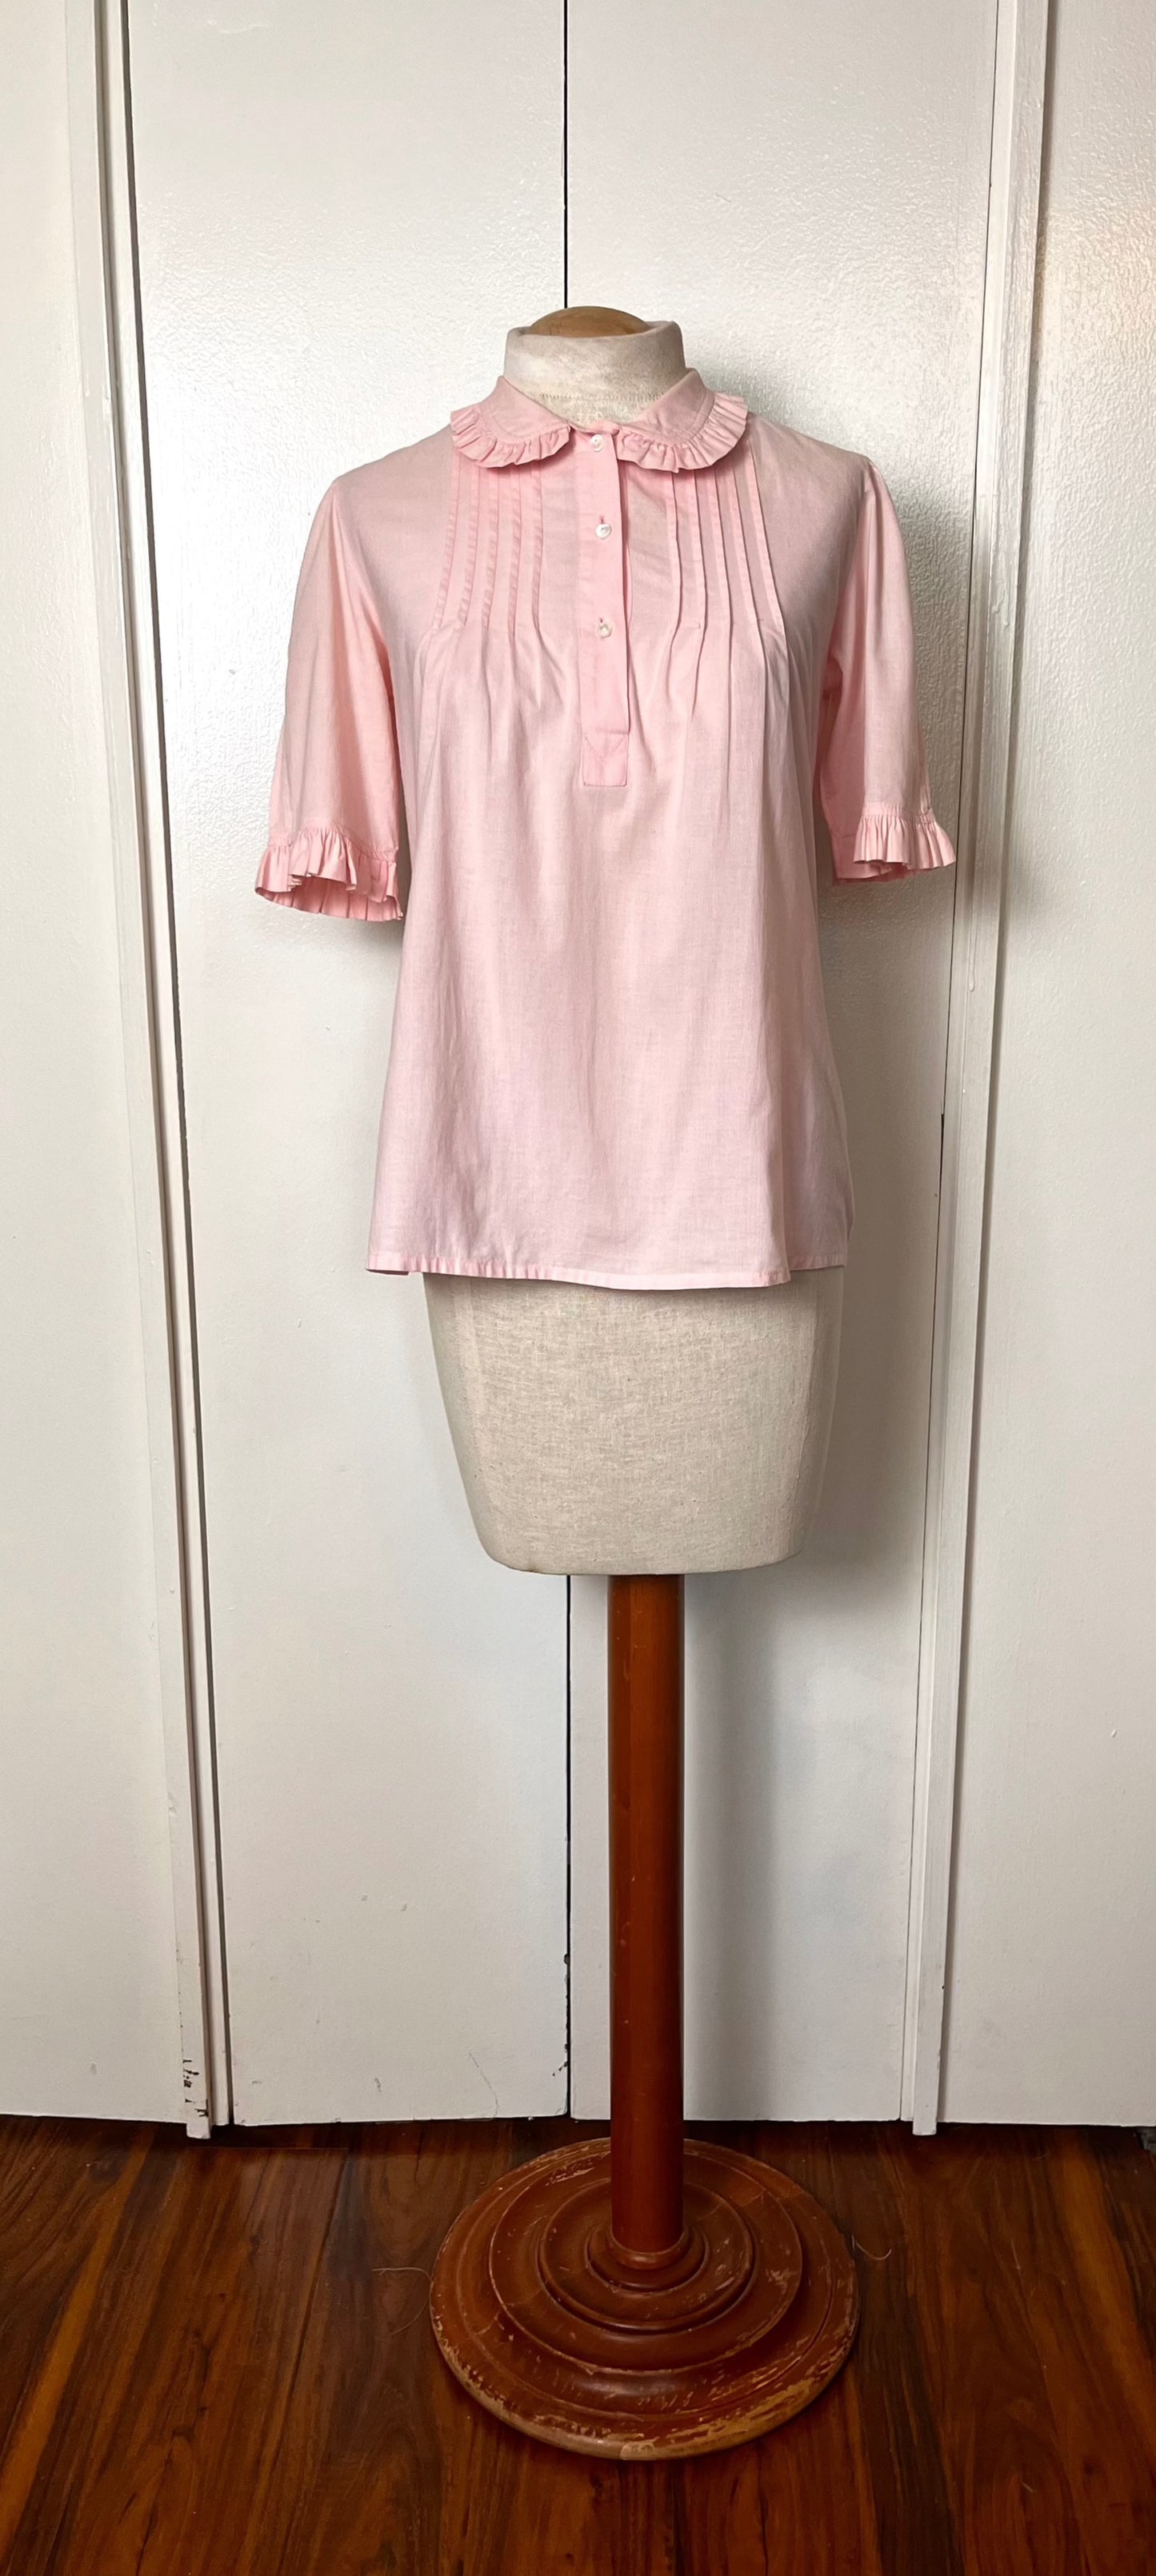 Vintage 1980's "Laura Ashley" Collared Light Pink Blouse